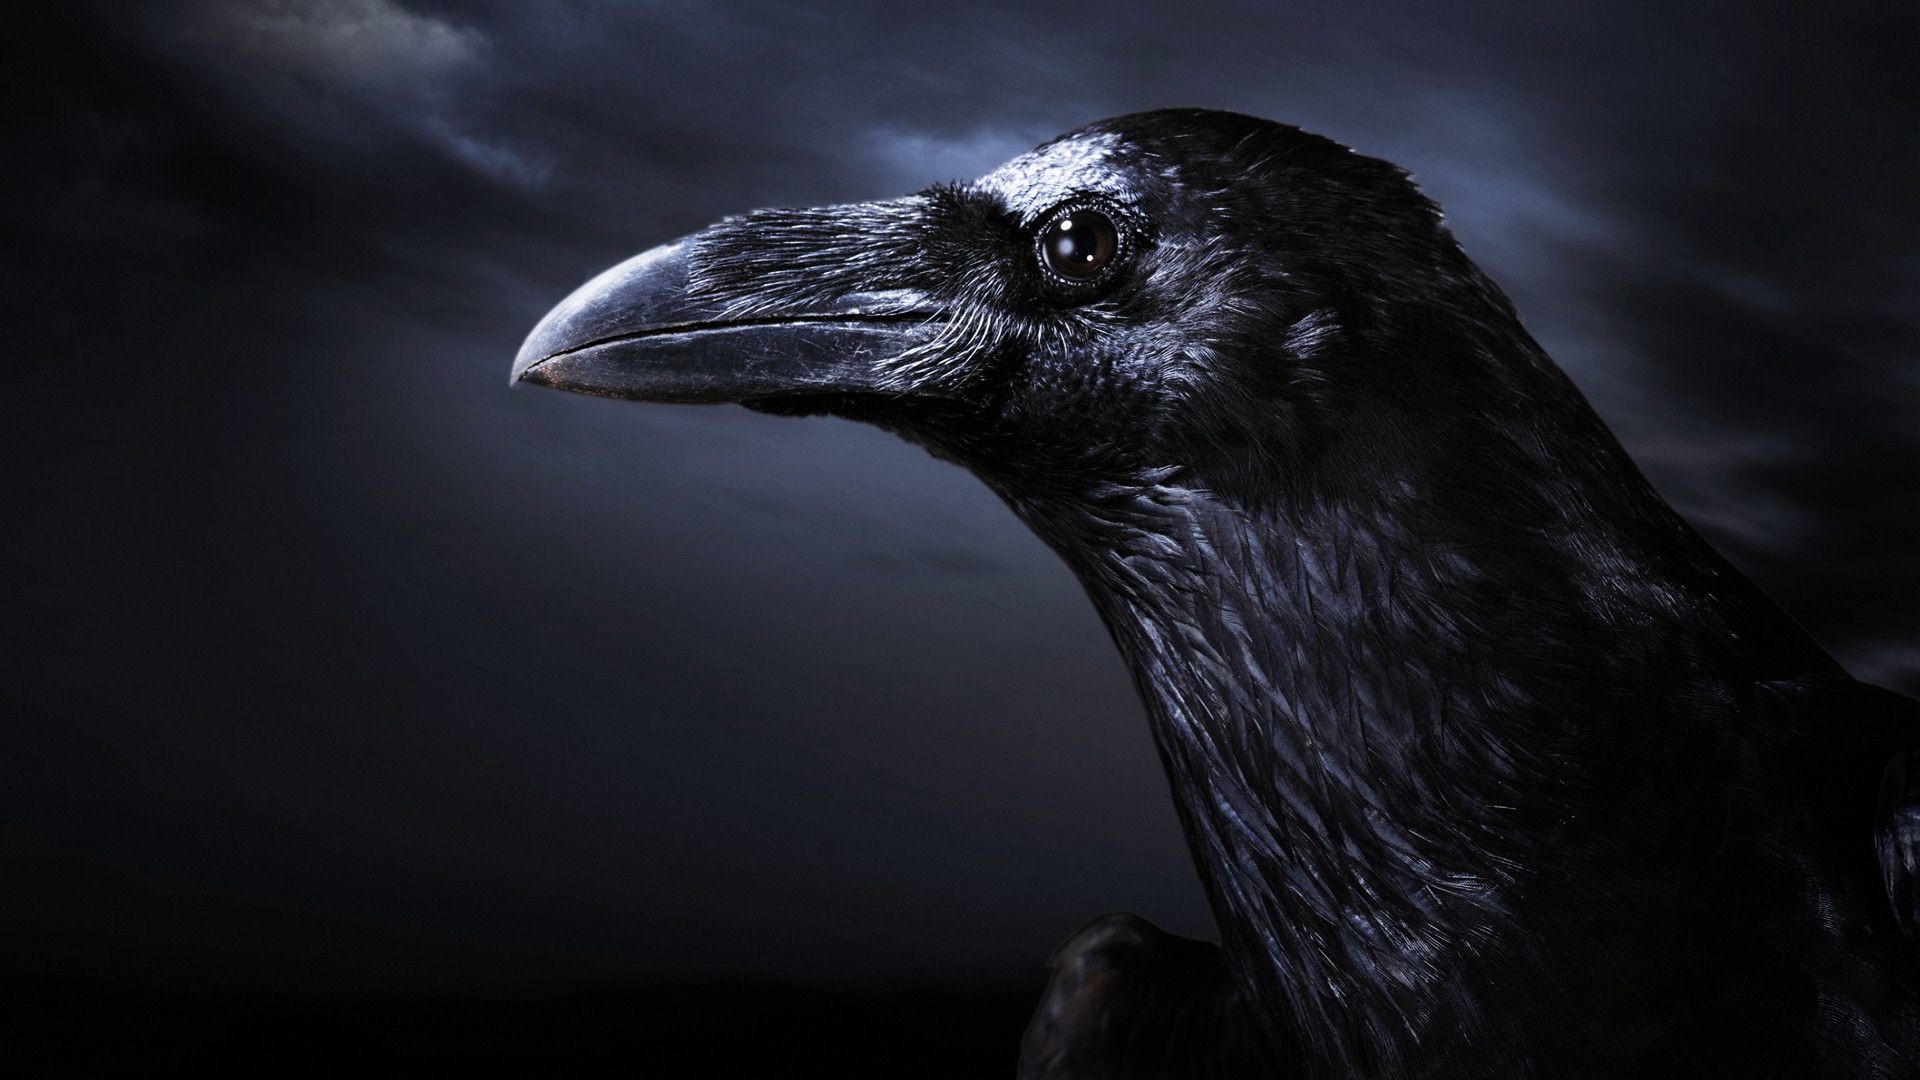 1920x1080 crow wallpapers and backgrounds | Crow Black Background Wallpaper ,Images,Pictures,Photos,